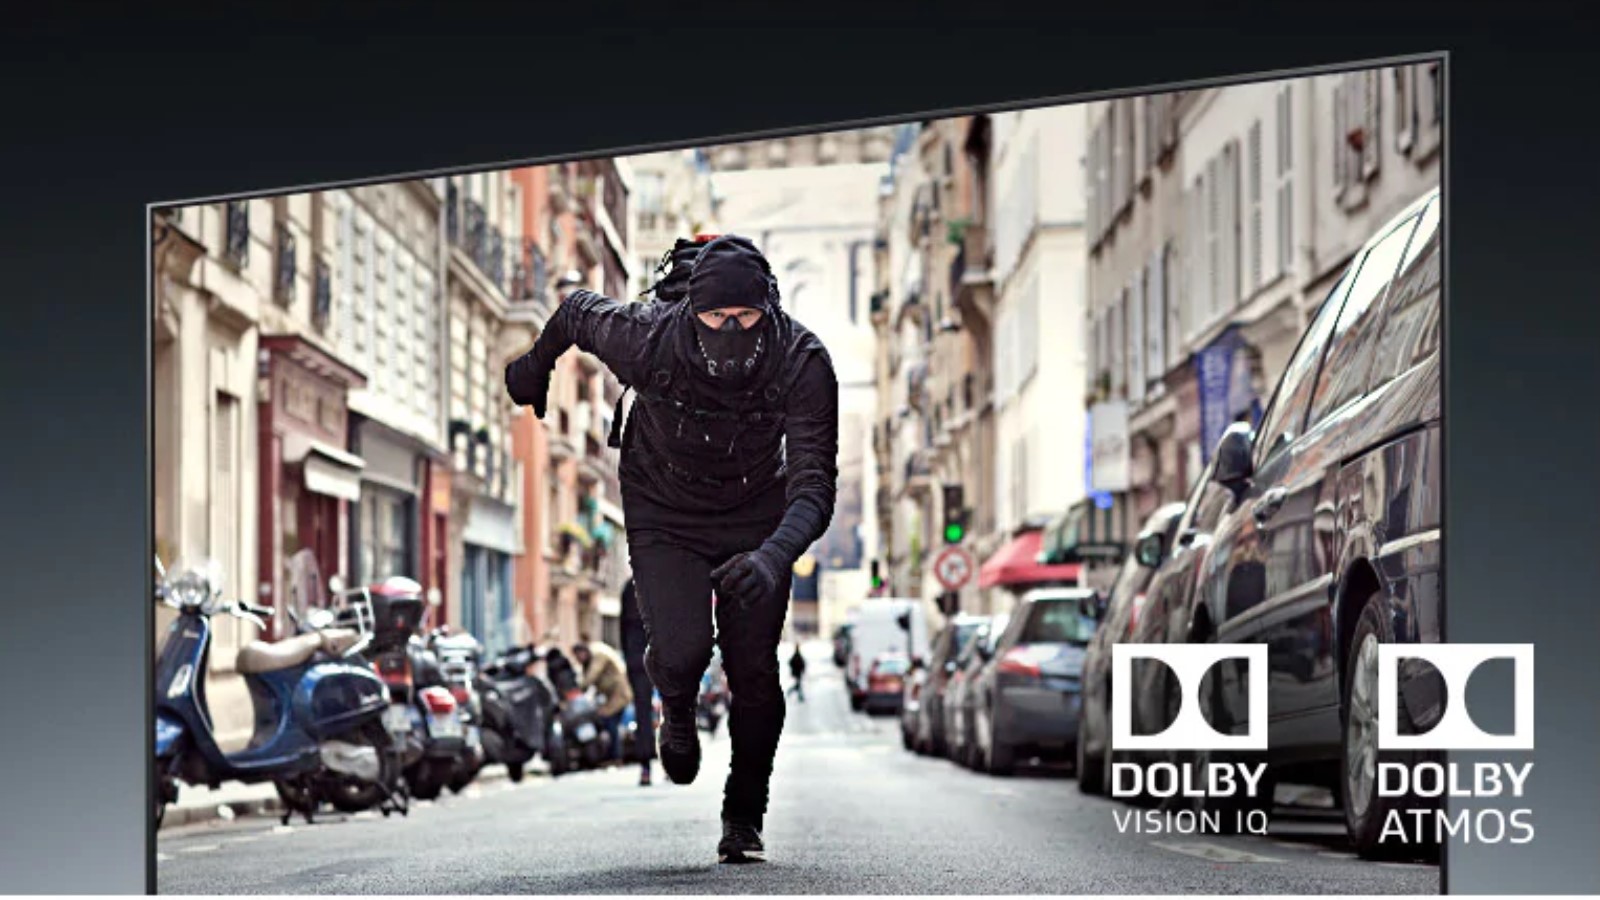 Dolby Vision IQ e Dolby Atmos